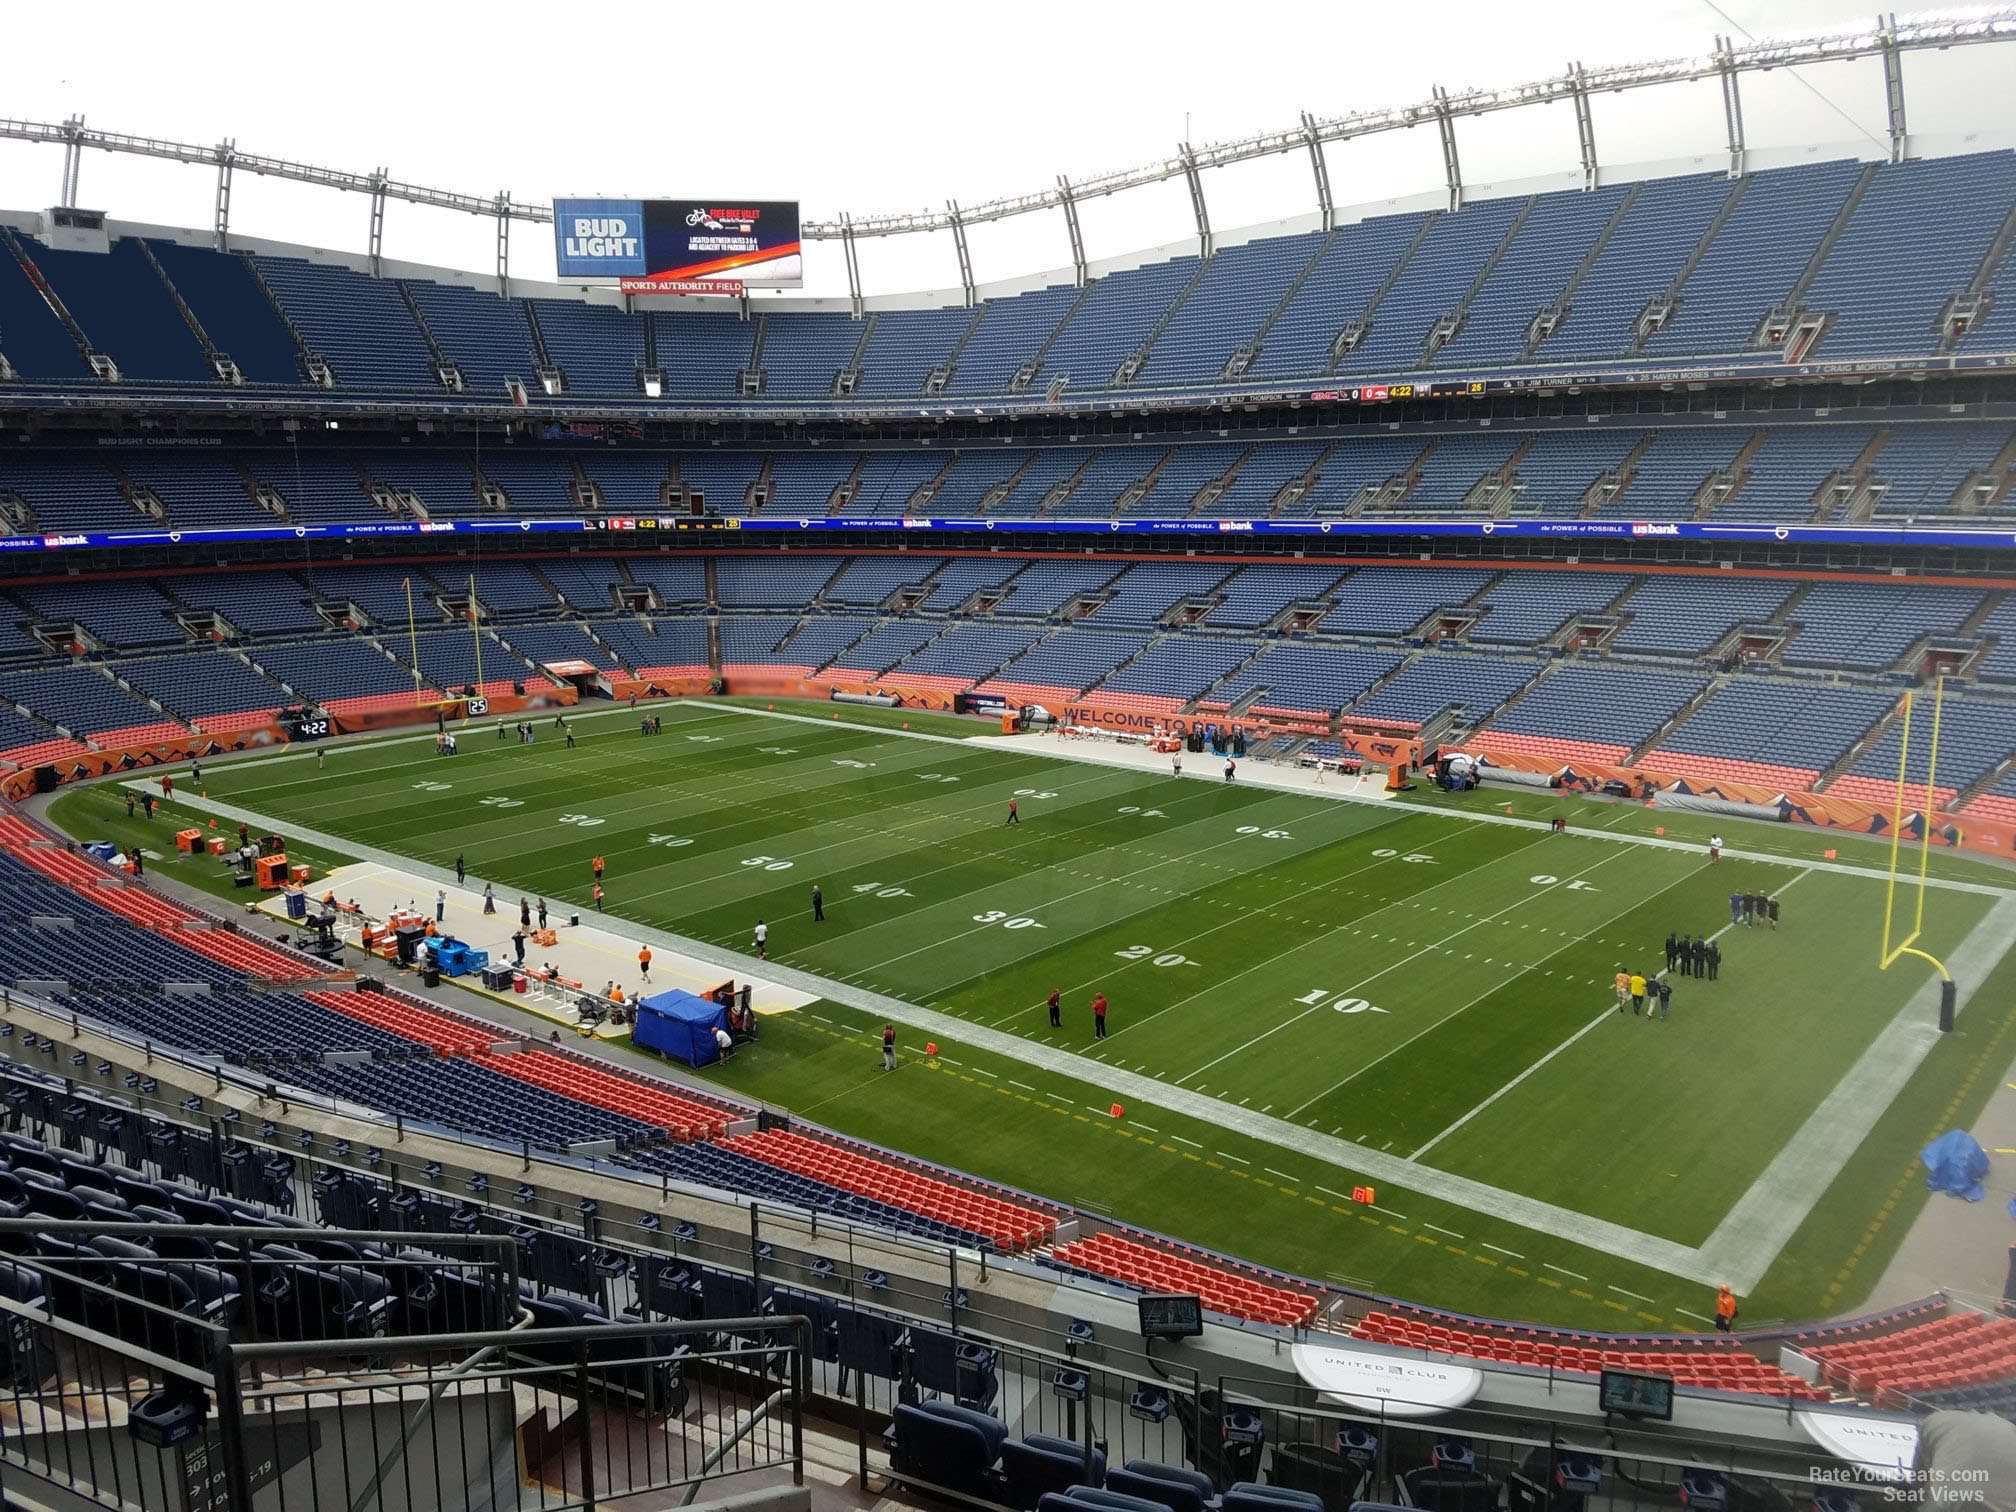 section 302, row 12 seat view  - empower field (at mile high)